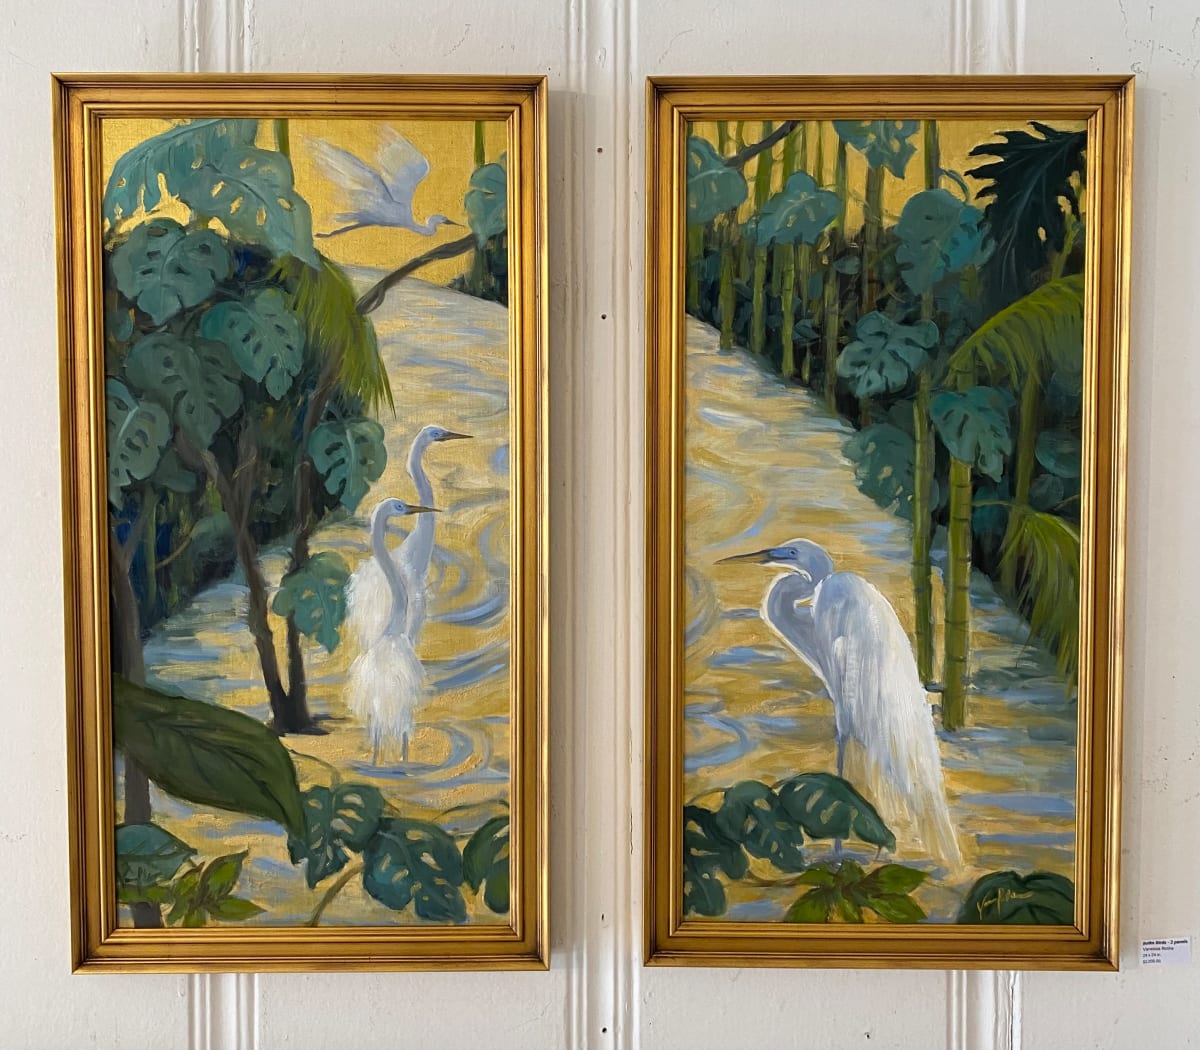 Botke Birds - 2 panels by Vanessa Rothe  Image: Gold shining paint has been used in the sky and lighter gold shining in the stream as well. Video and close ups upon request. Highly decorative works.